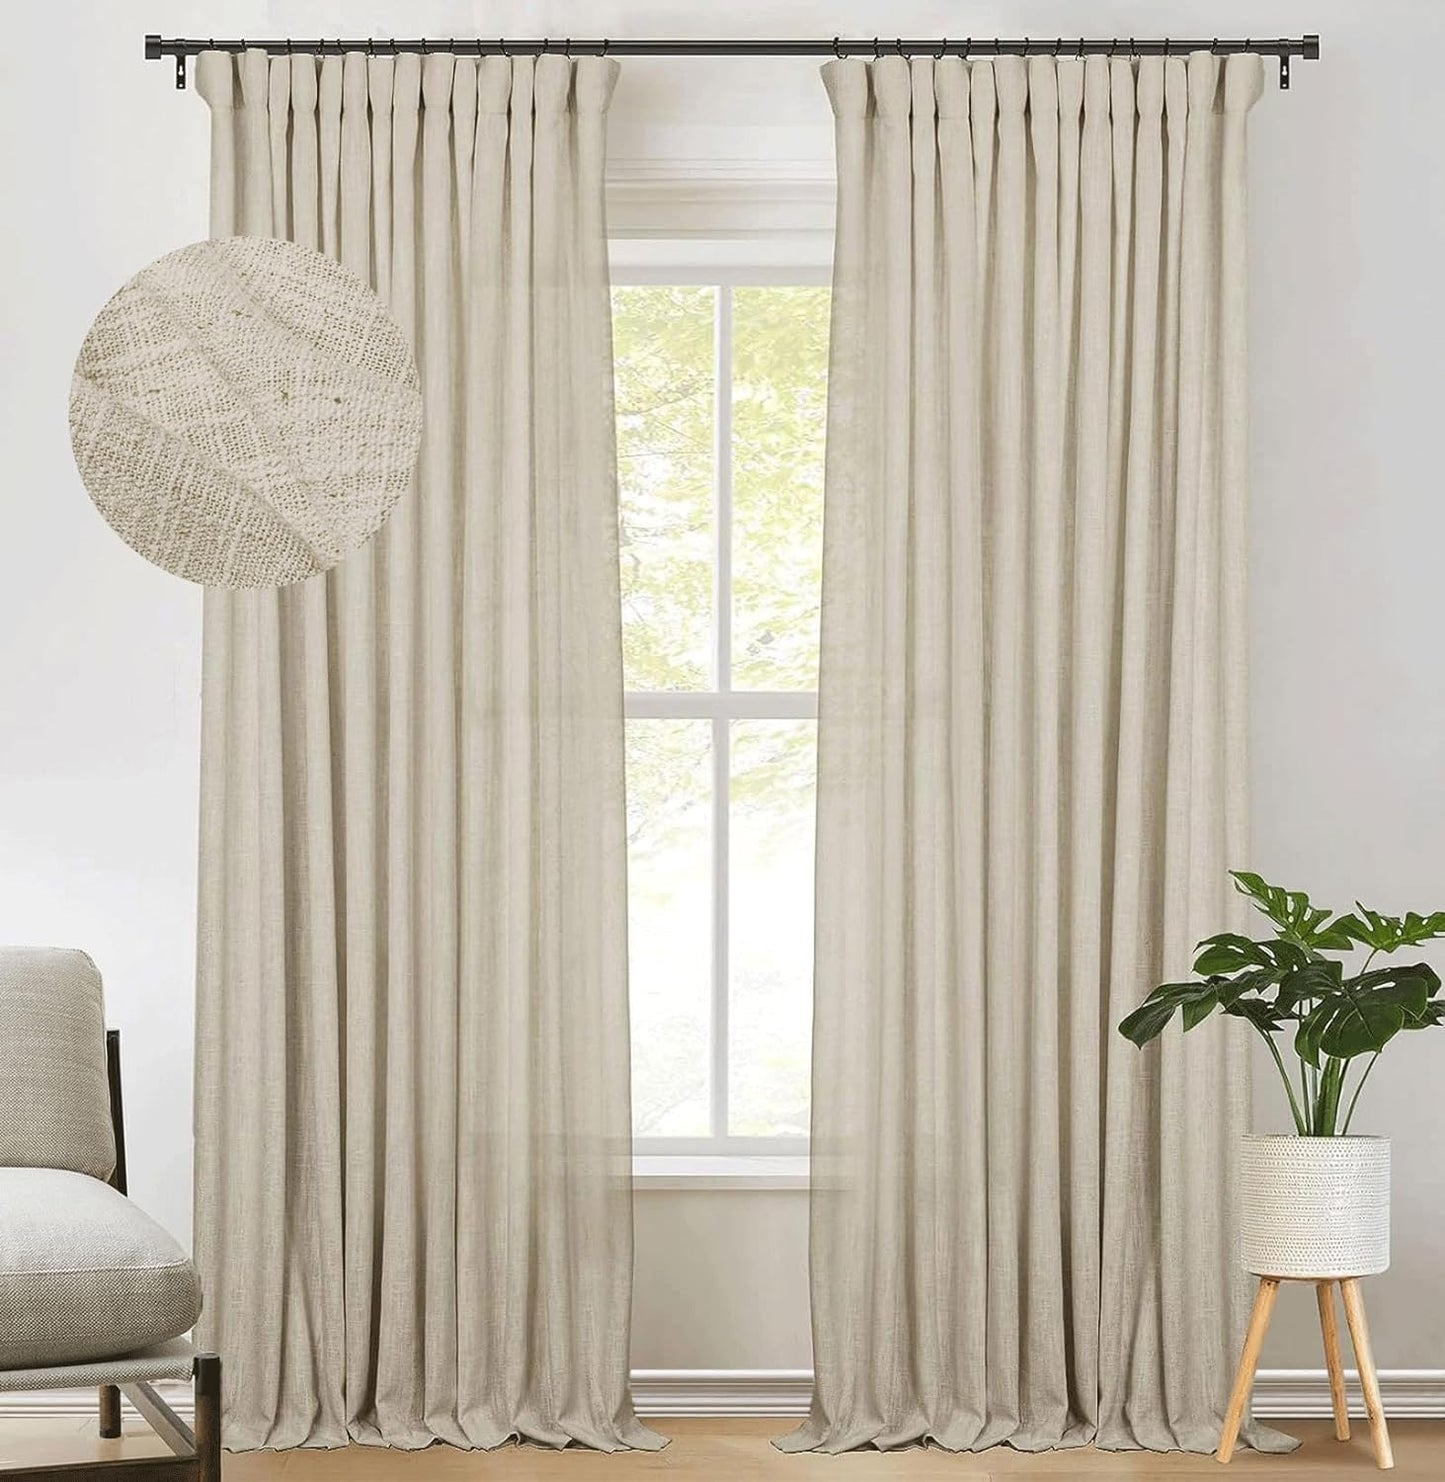 Zeerobee Beige White Linen Curtains for Living Room/Bedroom Linen Curtains 96 Inches Long 2 Panels Linen Drapes Farmhouse Pinch Pleated Curtains Light Filtering Privacy Curtains, W50 X L96  zeerobee 06 Dark Flax 50"W X 90"L 